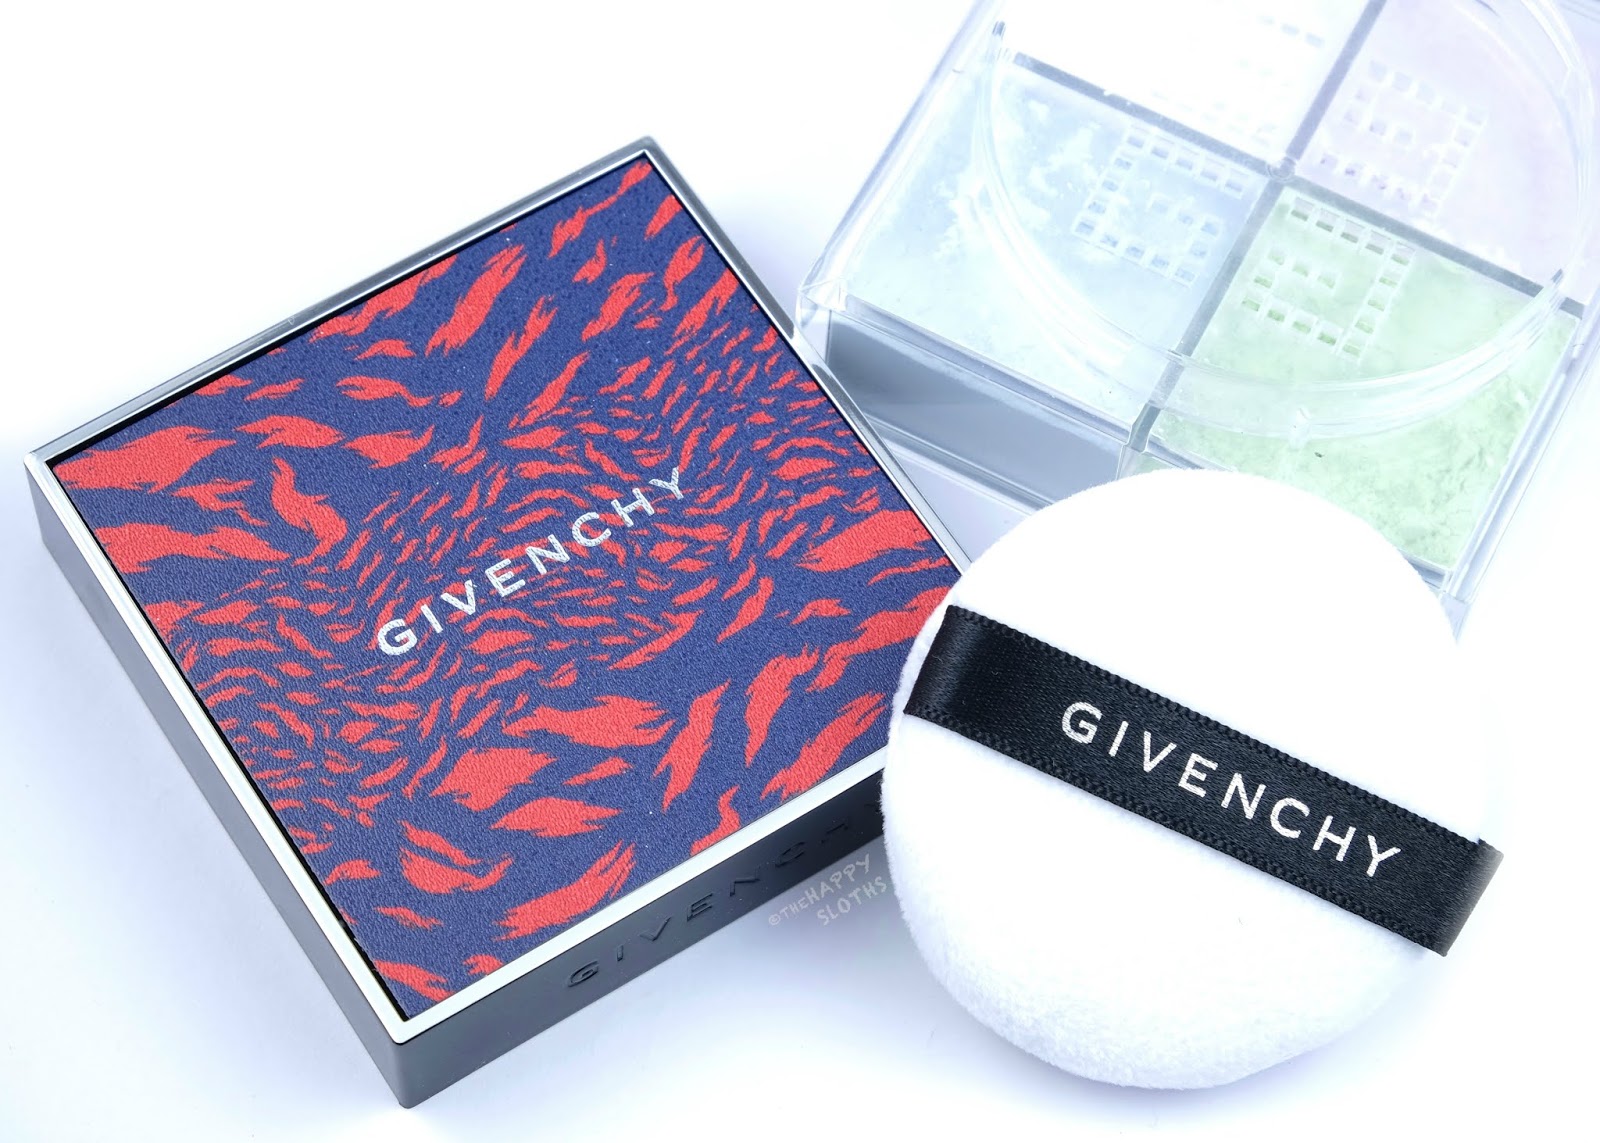 Givenchy | Couture Edition 2019 Prisme Libre Powder in "1 Mousseline Pastel": Review and Swatches